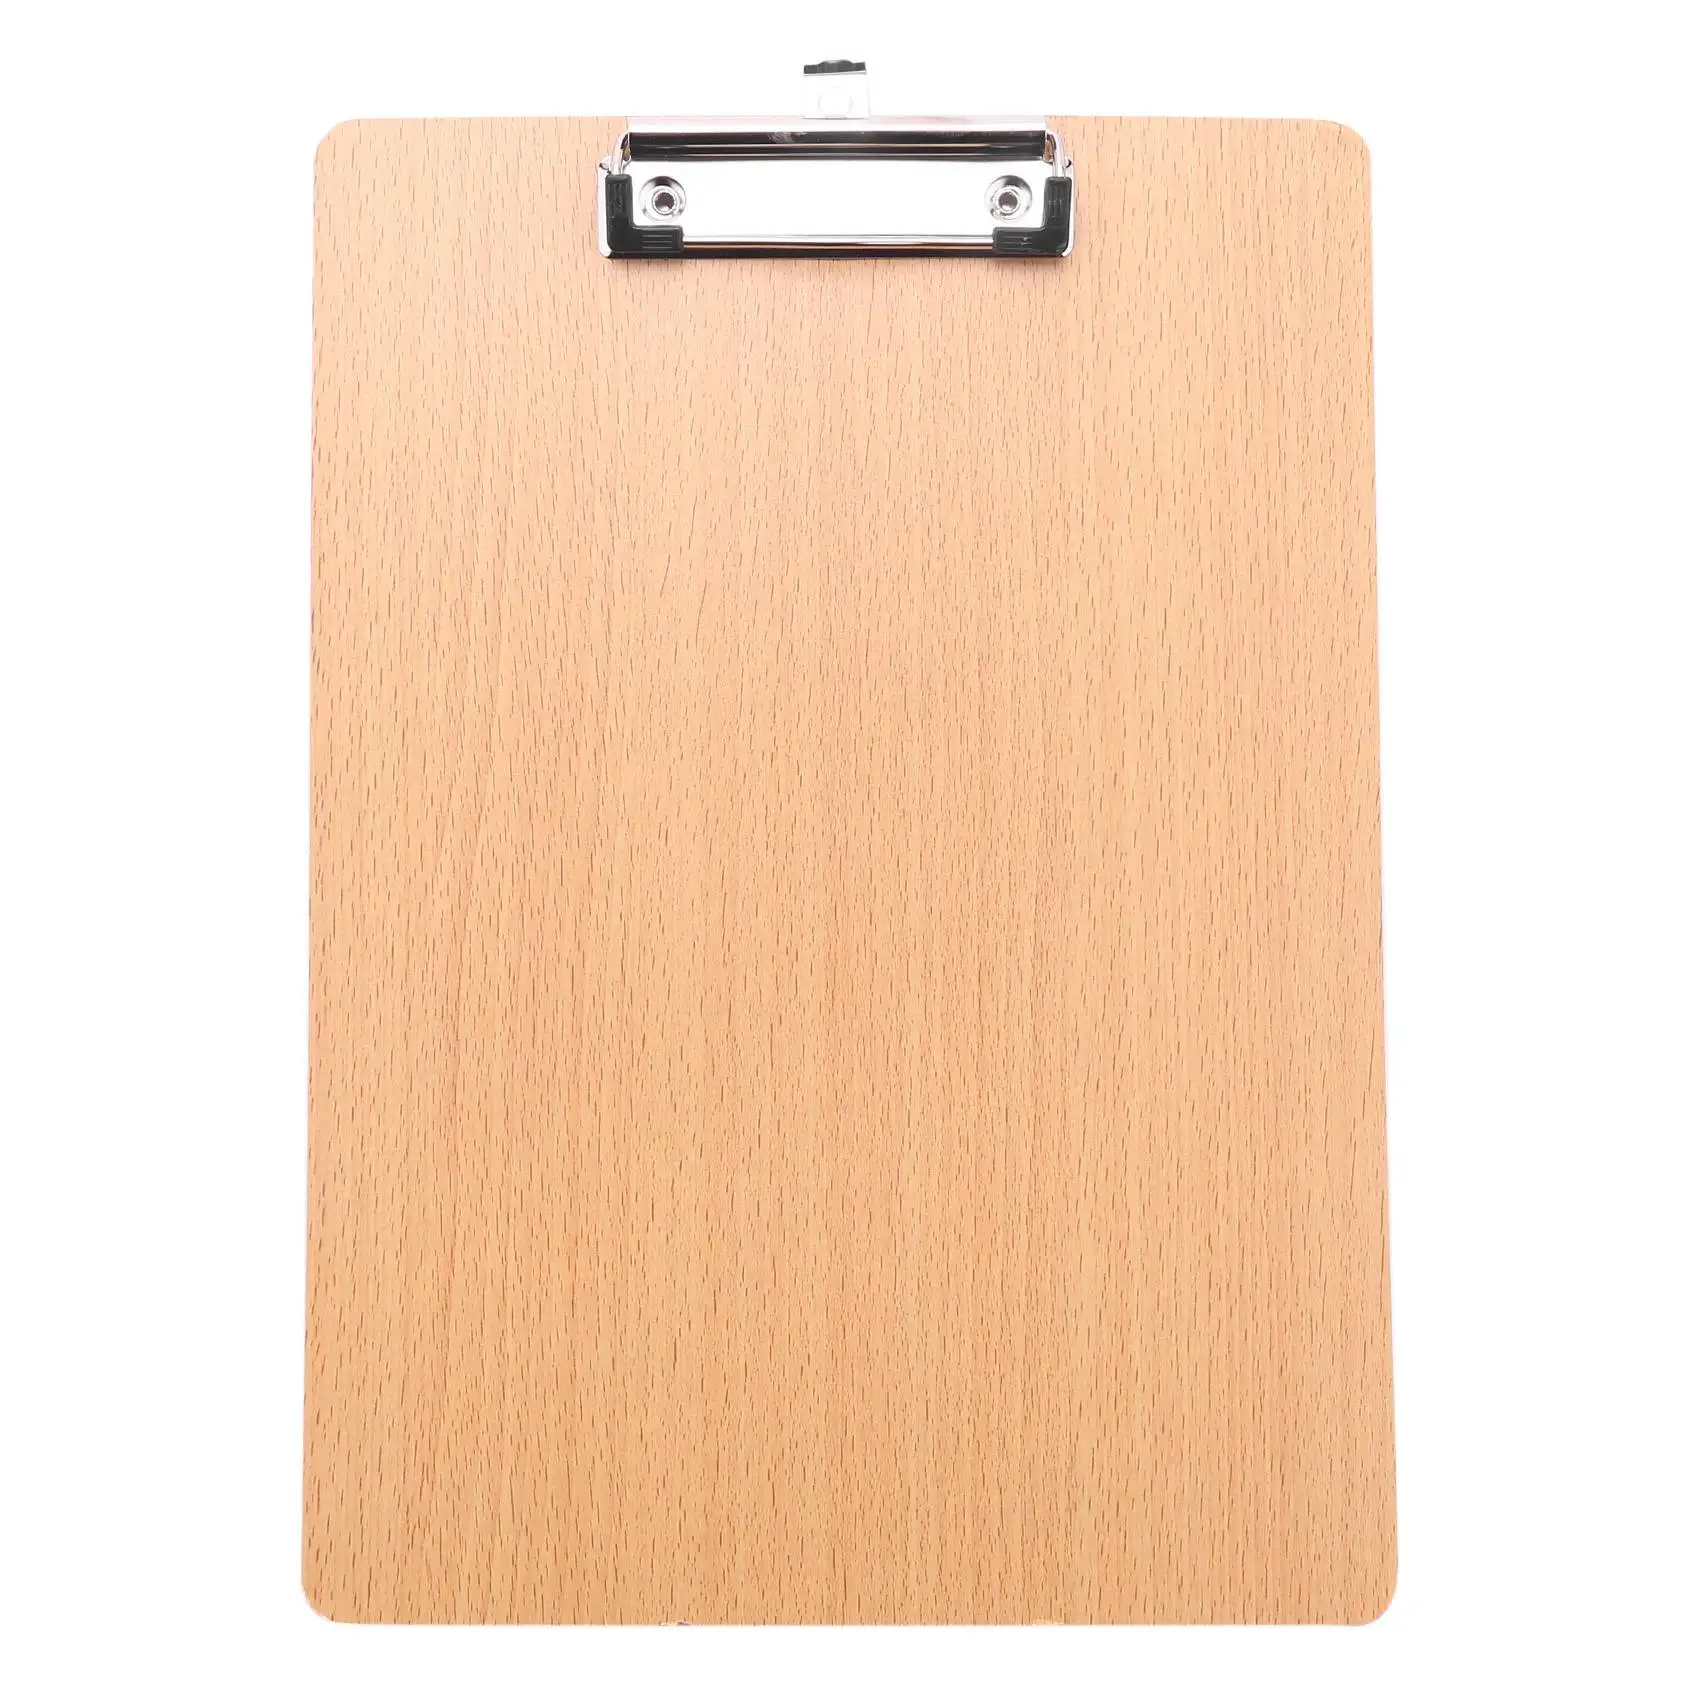 A4 High Quality Wooden Clipboard with Hanging Hole Clip Board Office Writing 